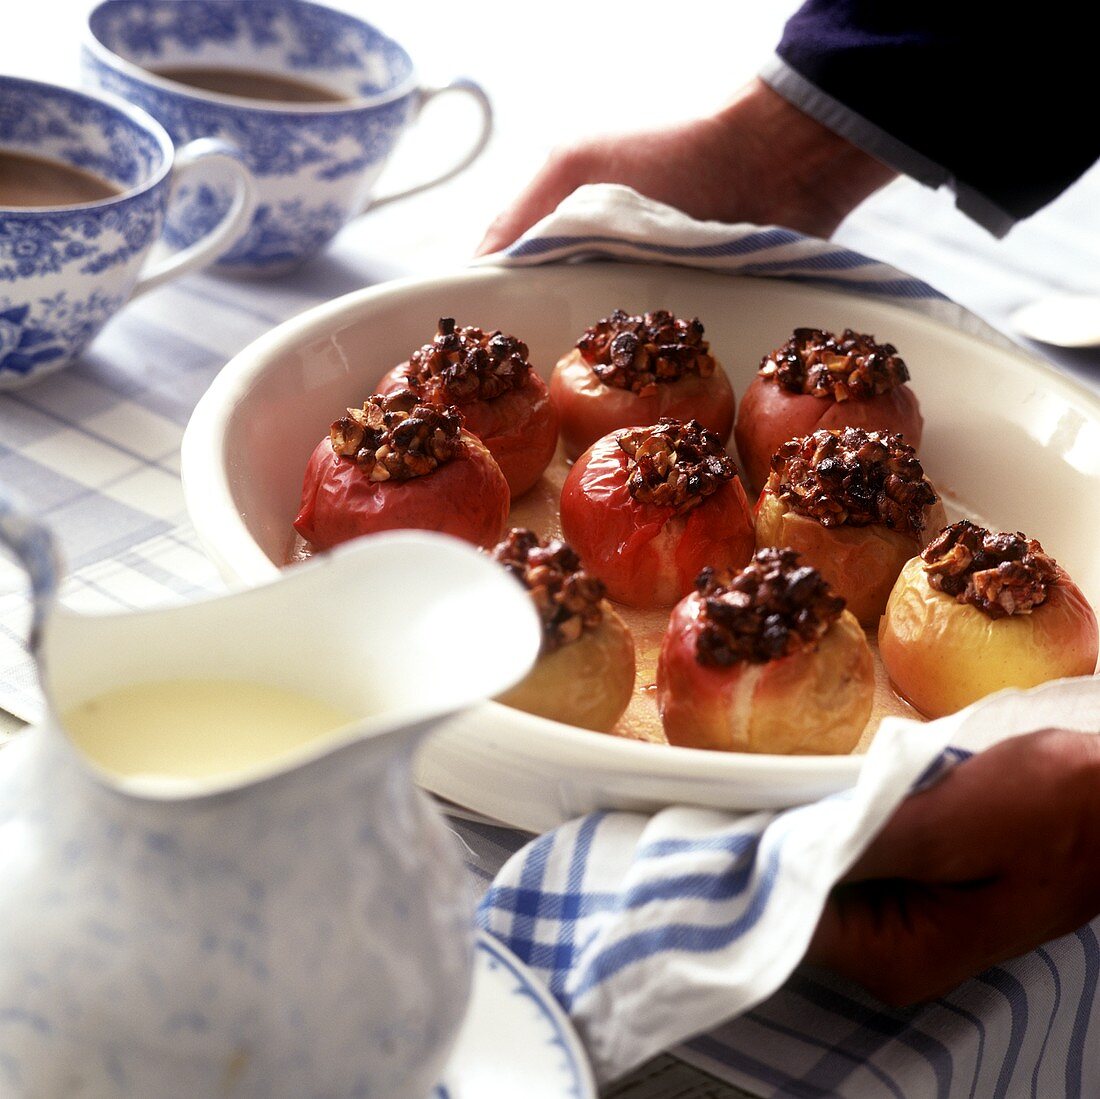 Hands serving baked apples with custard